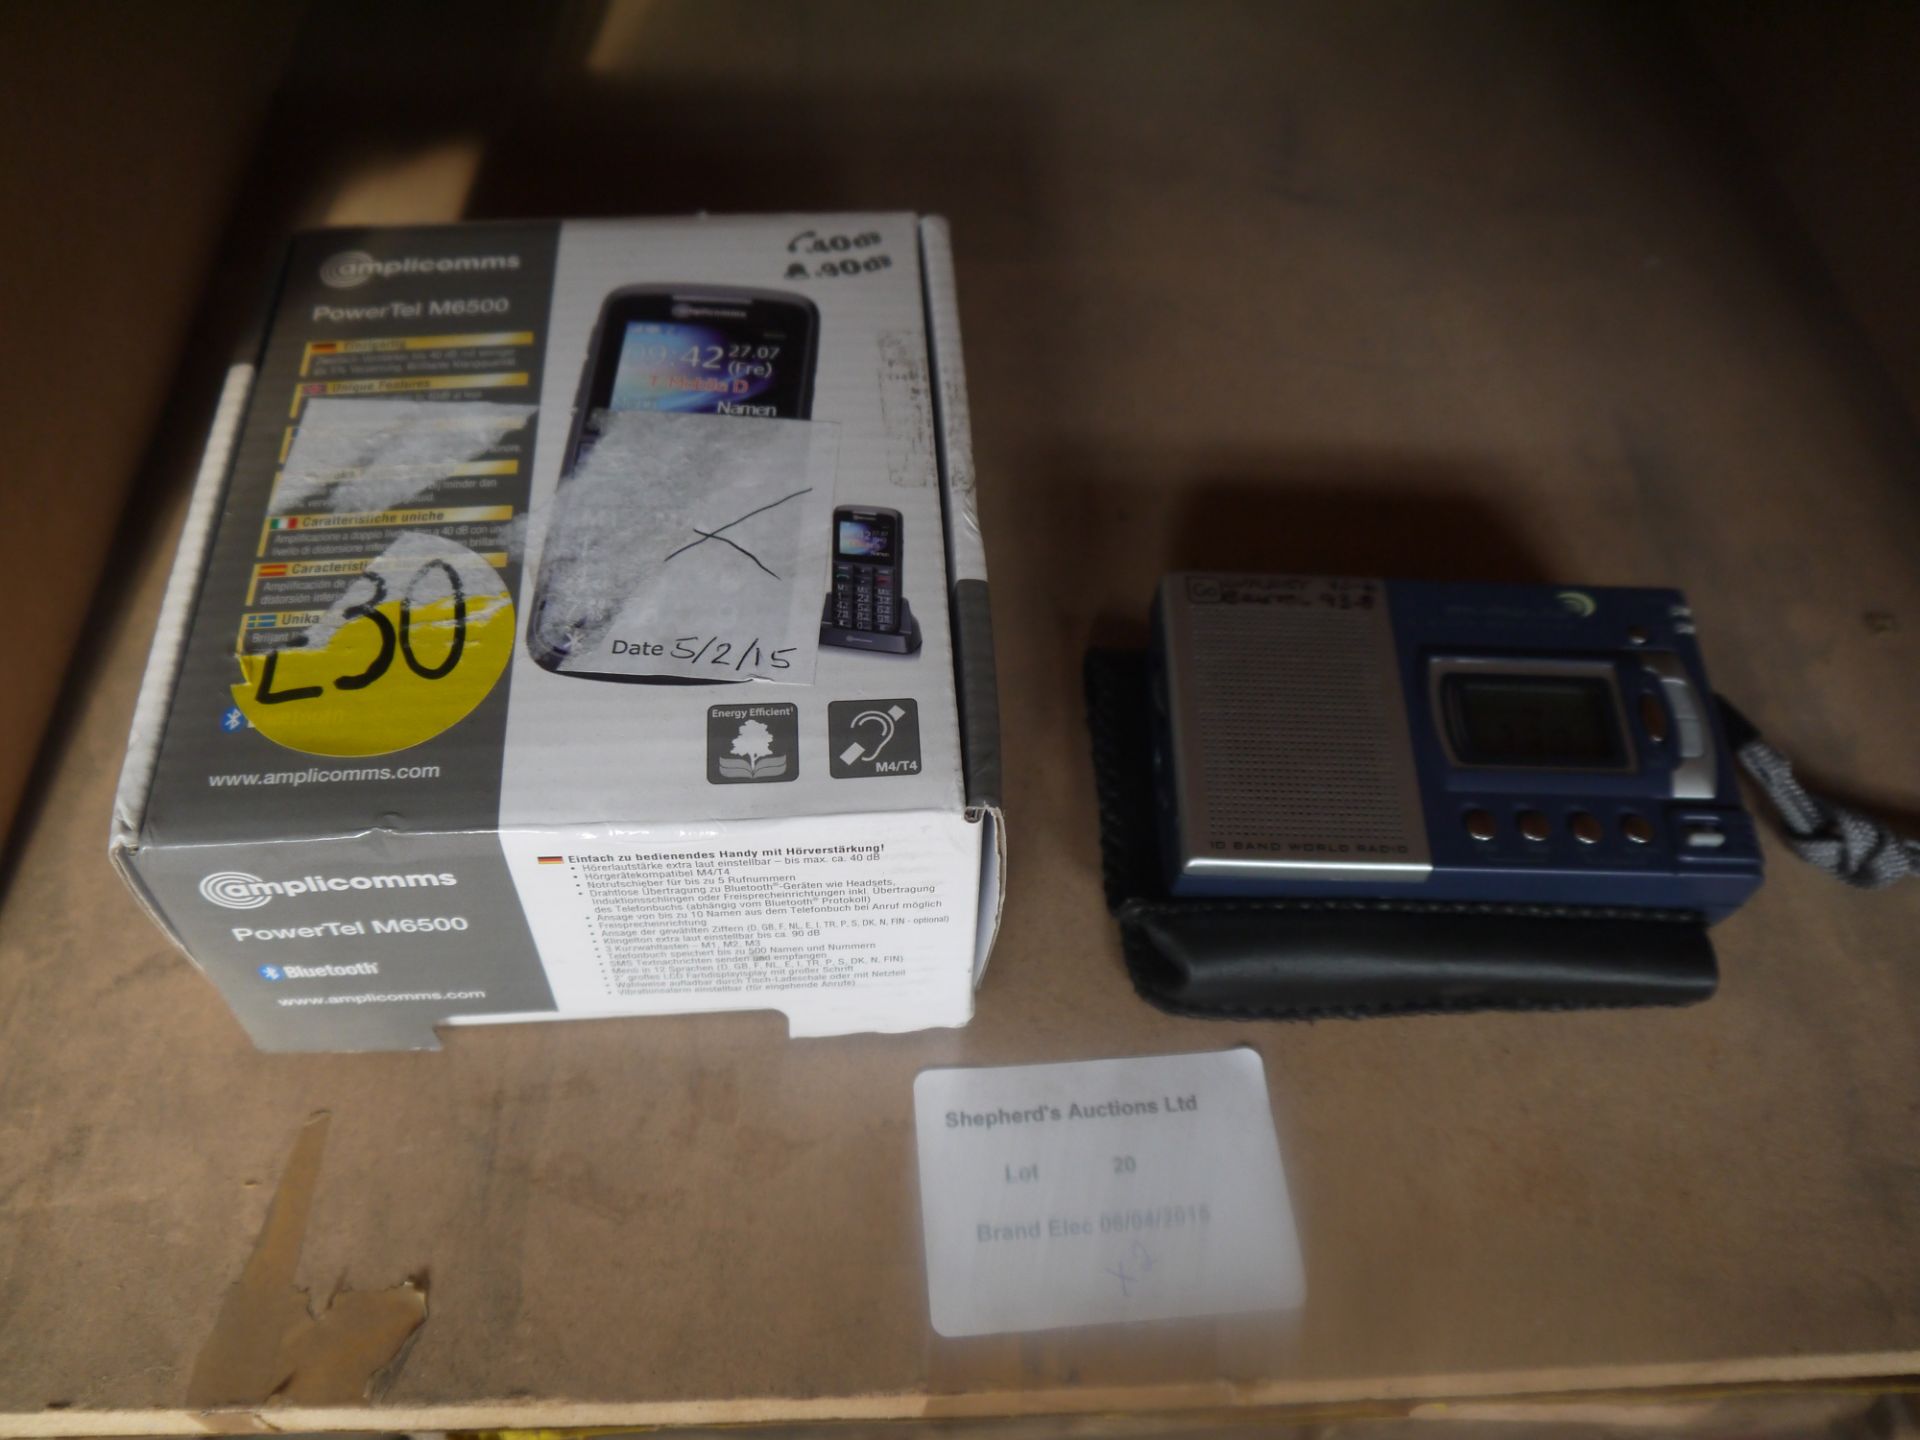 2 item lot that includes a Amplicomms M6500 mobile phone and a small pocket radio